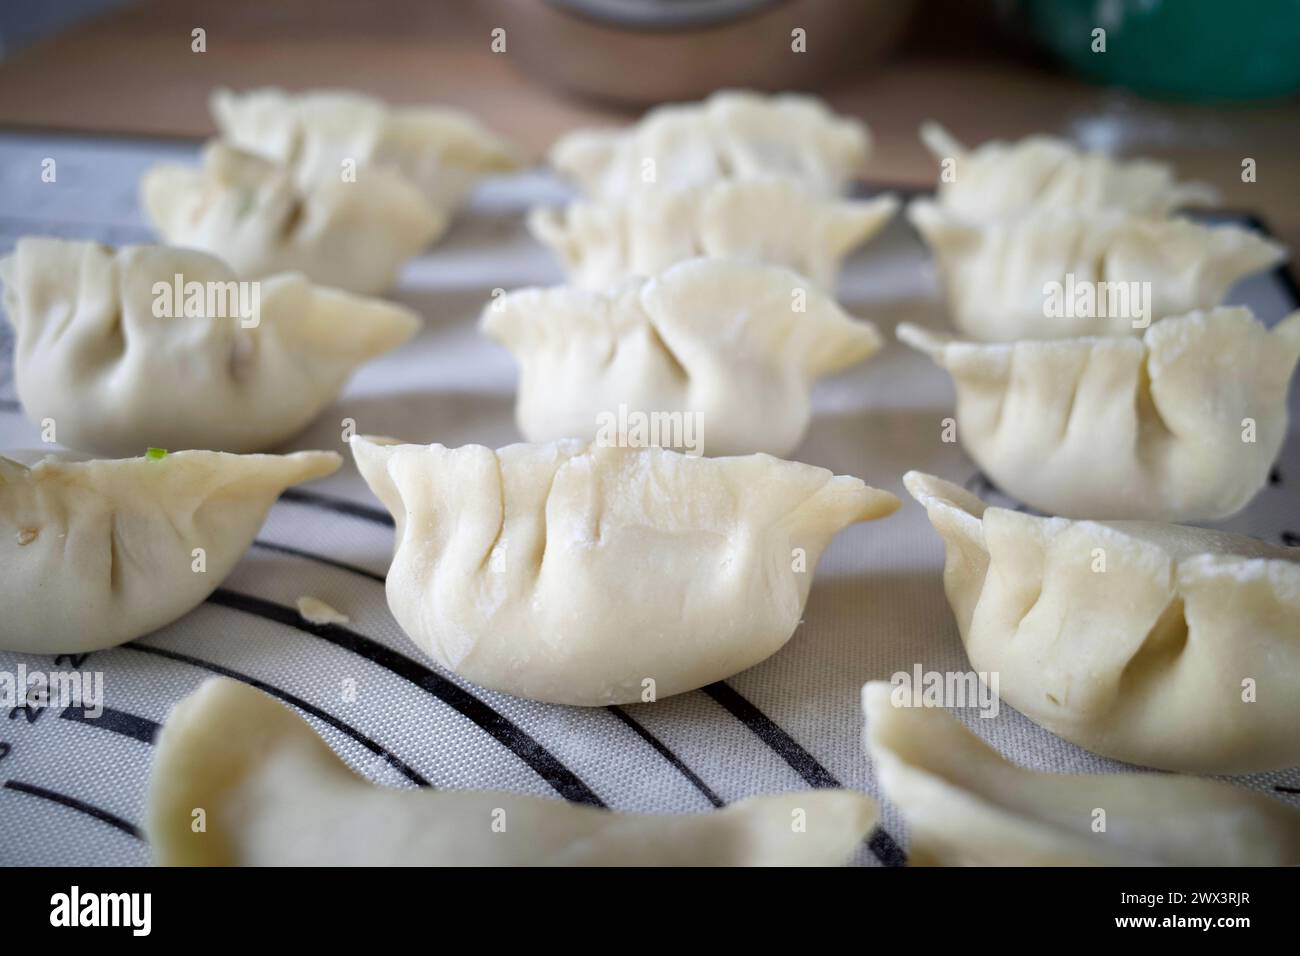 Raw Chinese dumplings on a table Stock Photo